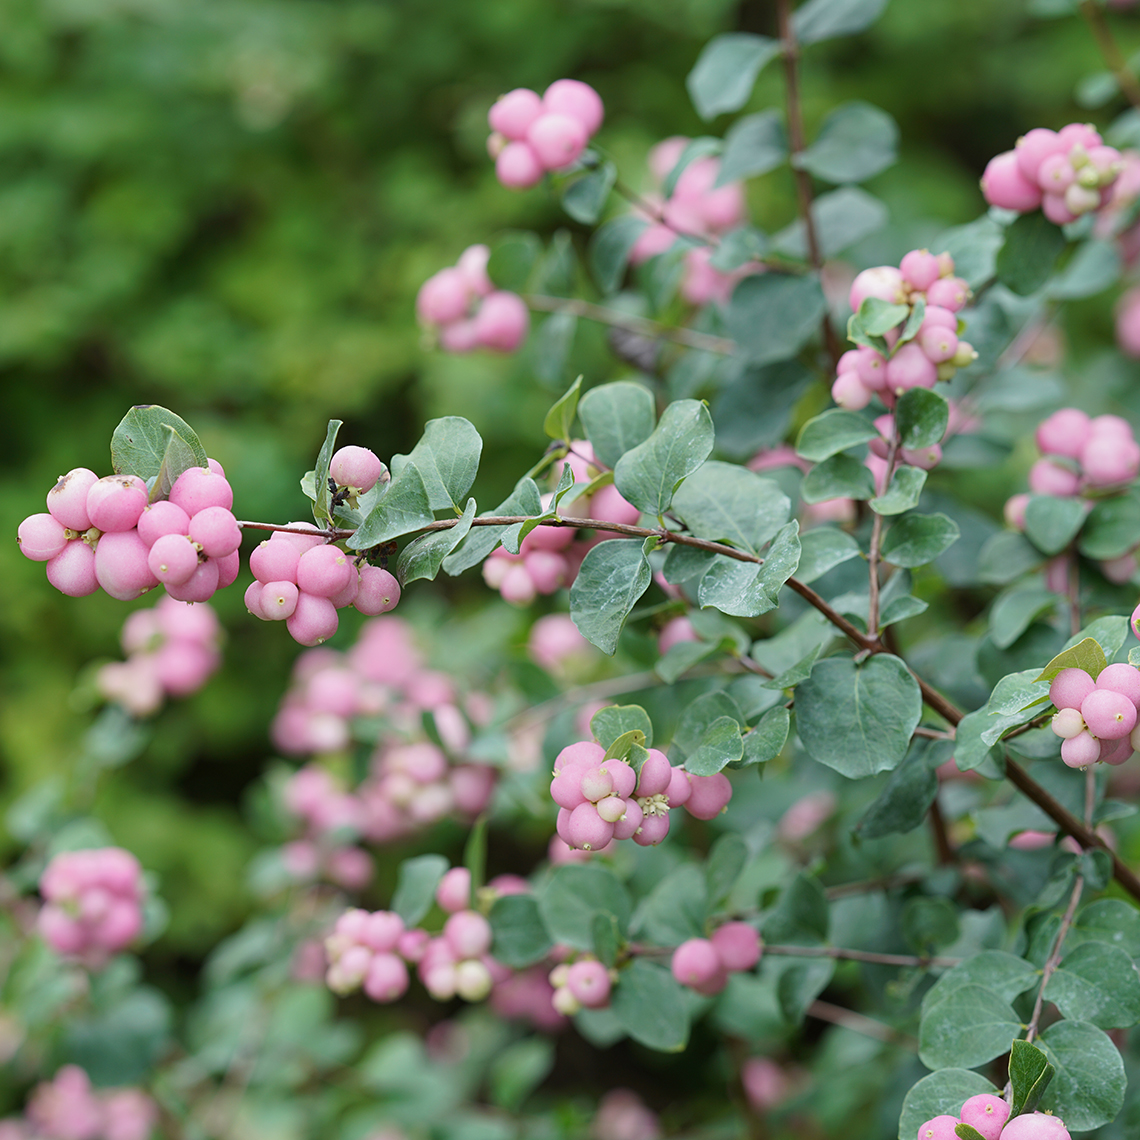 A branch of Proud Berry symphoricarpos with a heavy set of pink berries